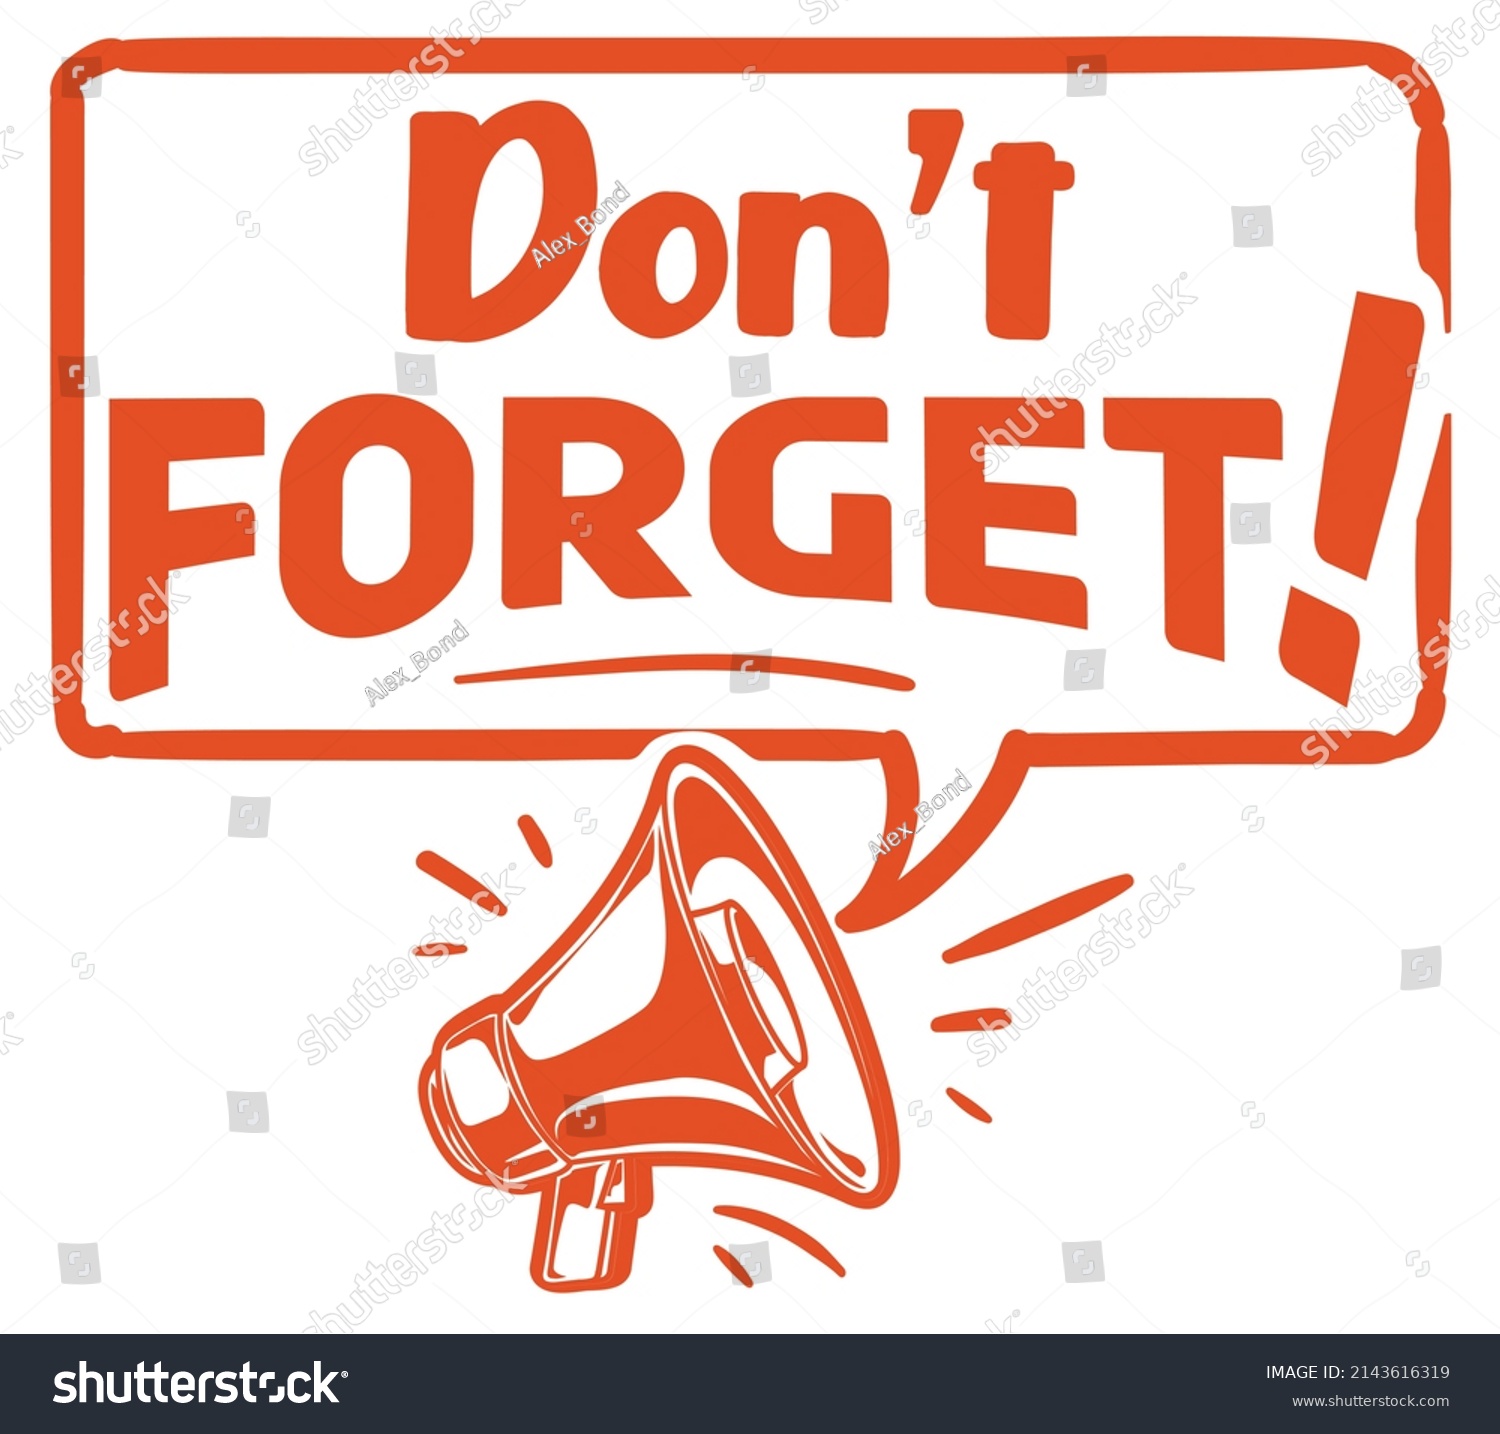 Forget Advertising Sign Megaphone Stock Vector Royalty Free 2143616319 Shutterstock